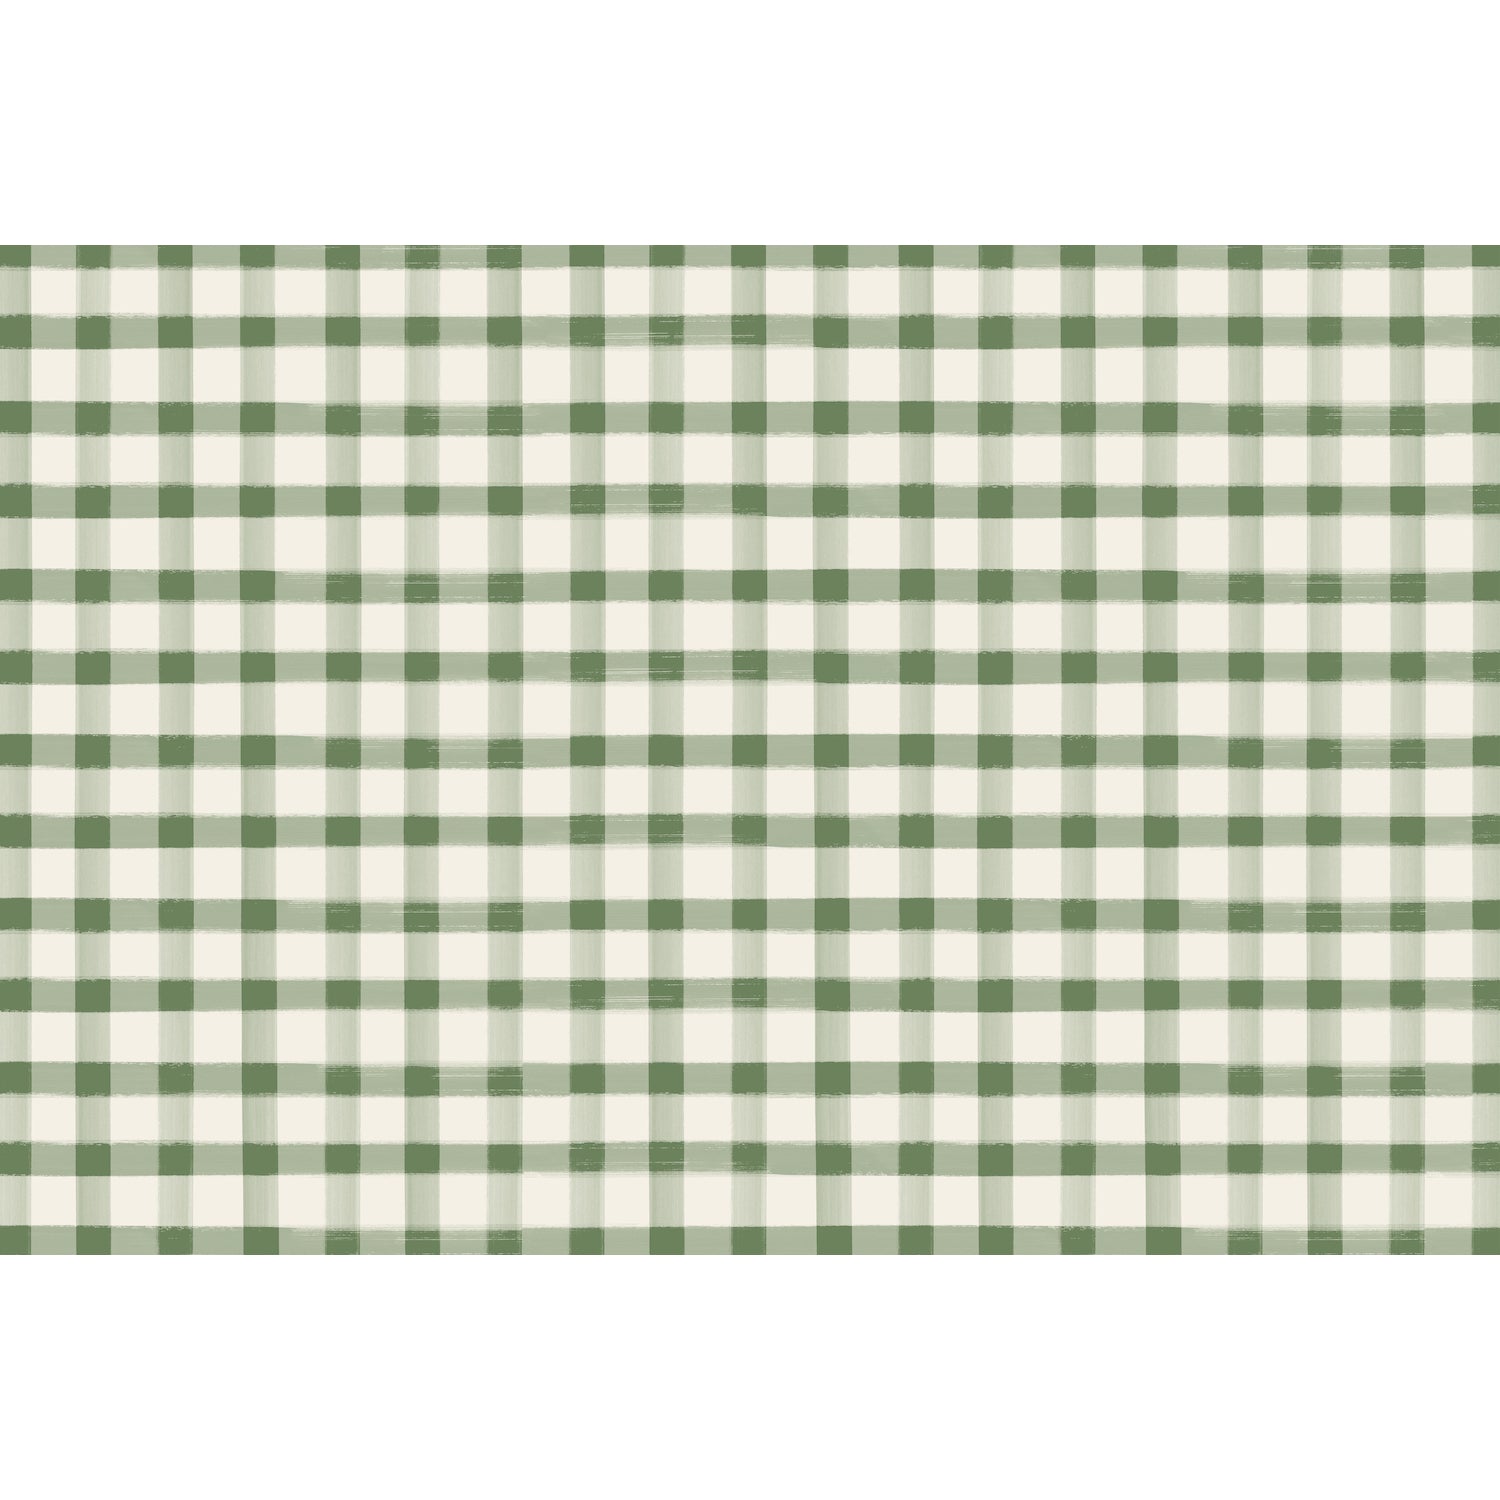 Pastel green color clear Placemat by PalitraArt